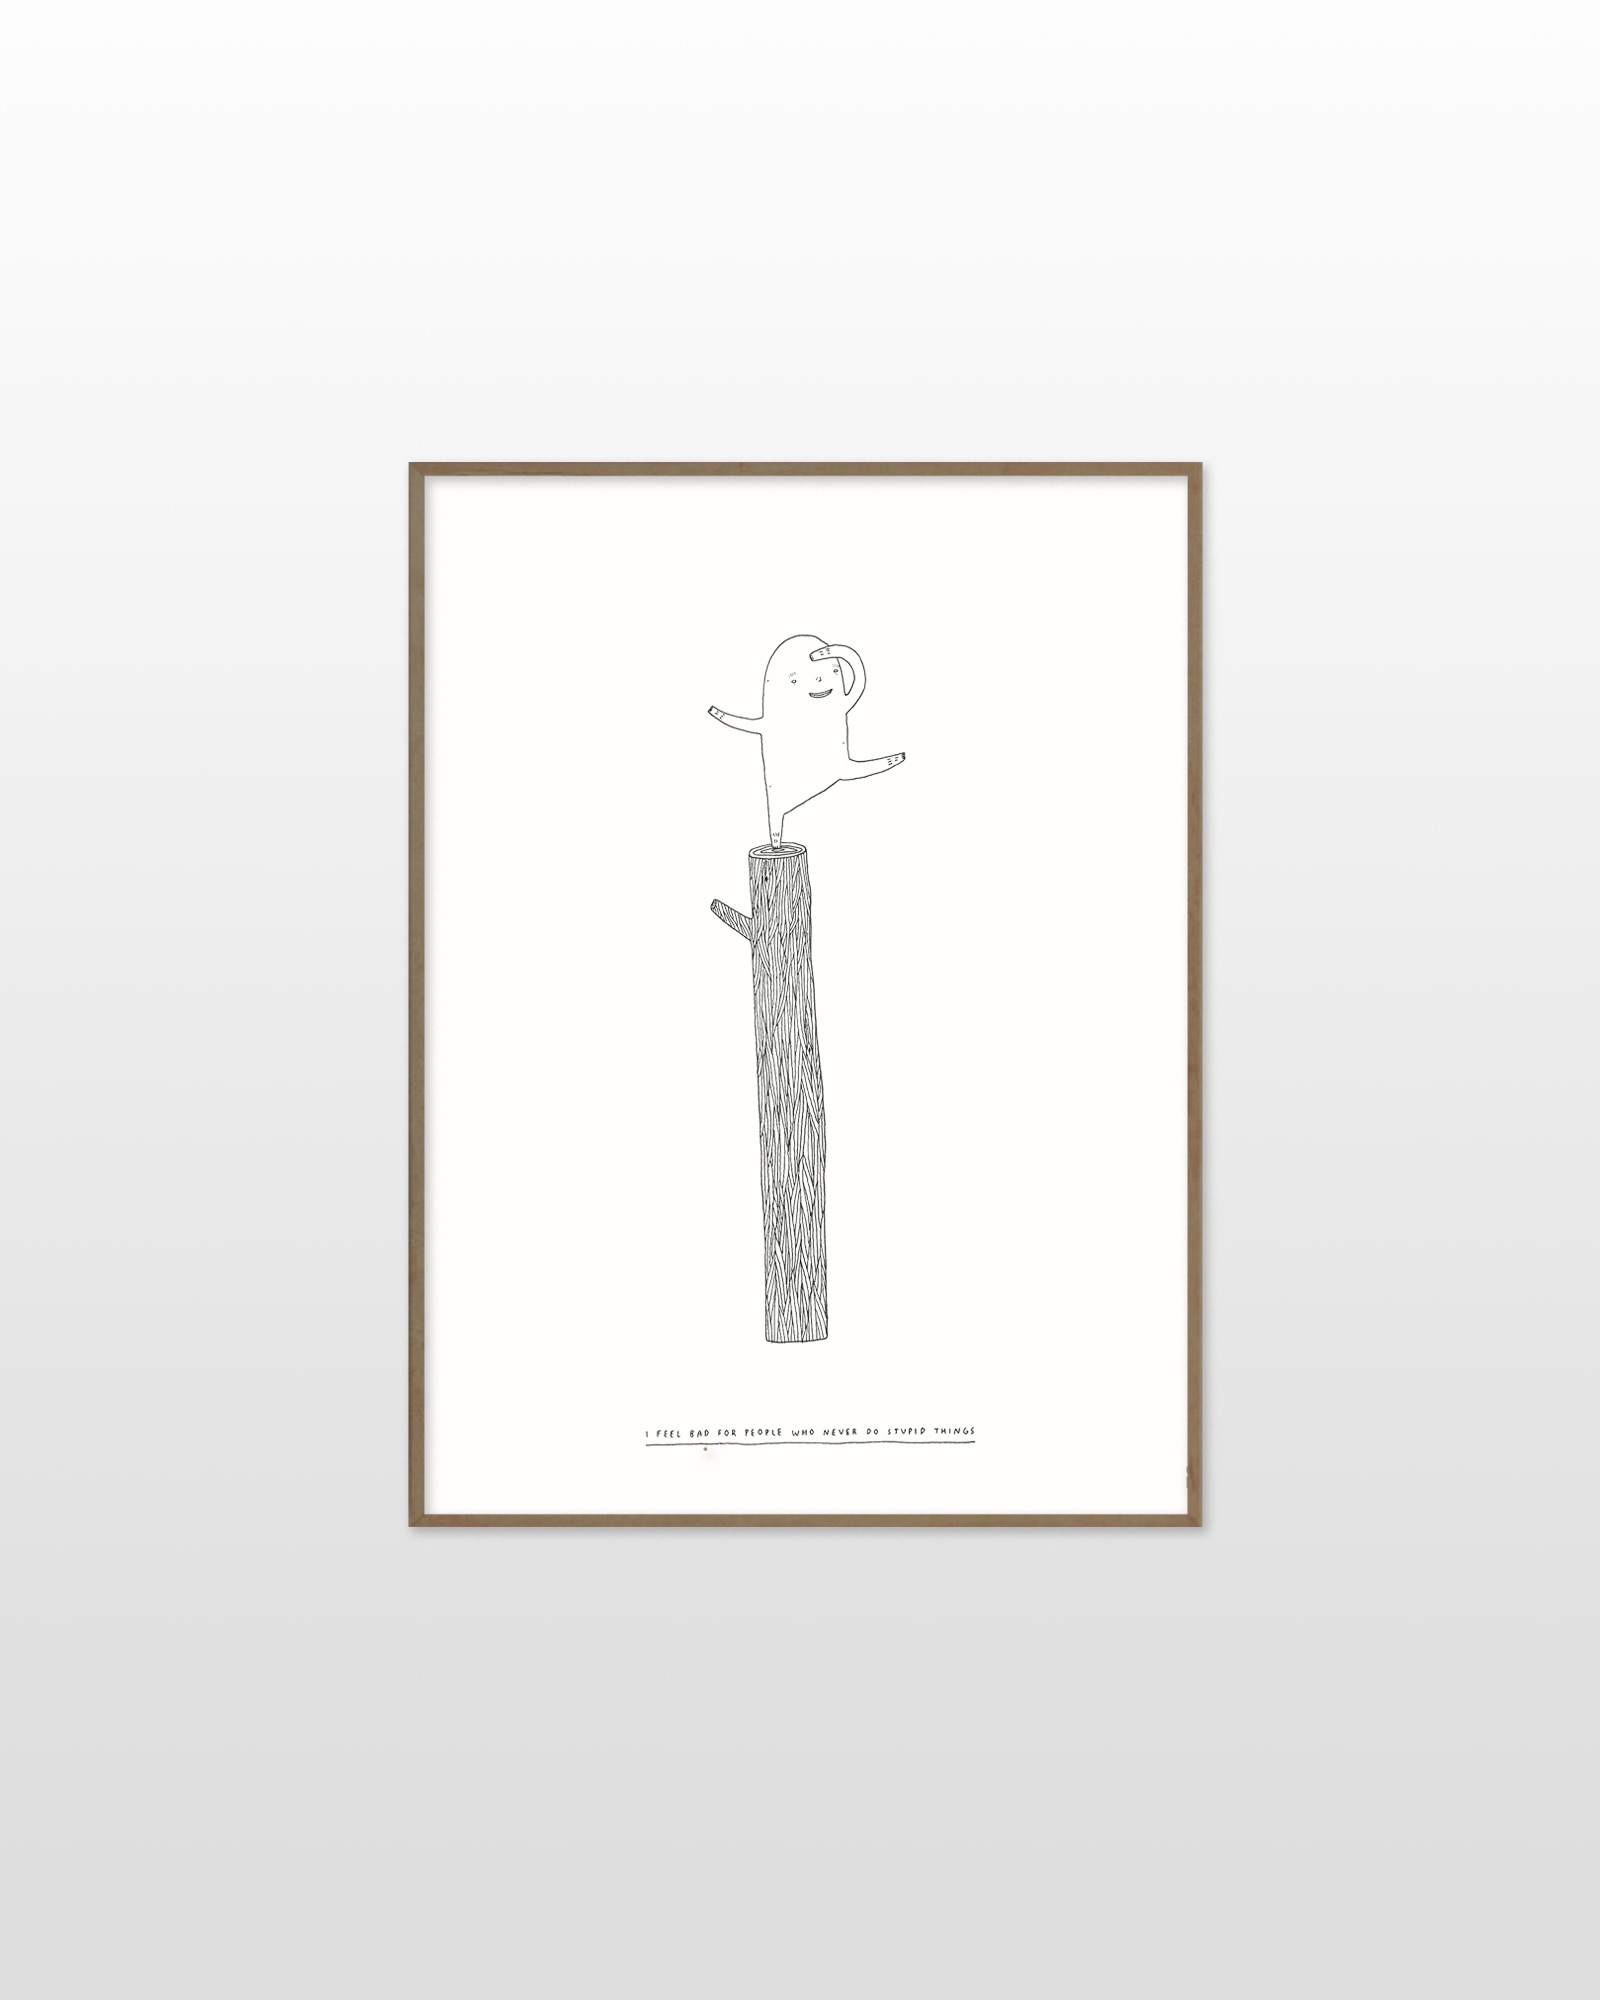 posters-prints, giclee-print, family-friendly, illustrative, minimalistic, monochrome, cartoons, humor, black, white, ink, paper, amusing, black-and-white, contemporary-art, cute, danish, decorative, design, interior, interior-design, modern, modern-art, nordic, posters, prints, scandinavien, Buy original high quality art. Paintings, drawings, limited edition prints & posters by talented artists.